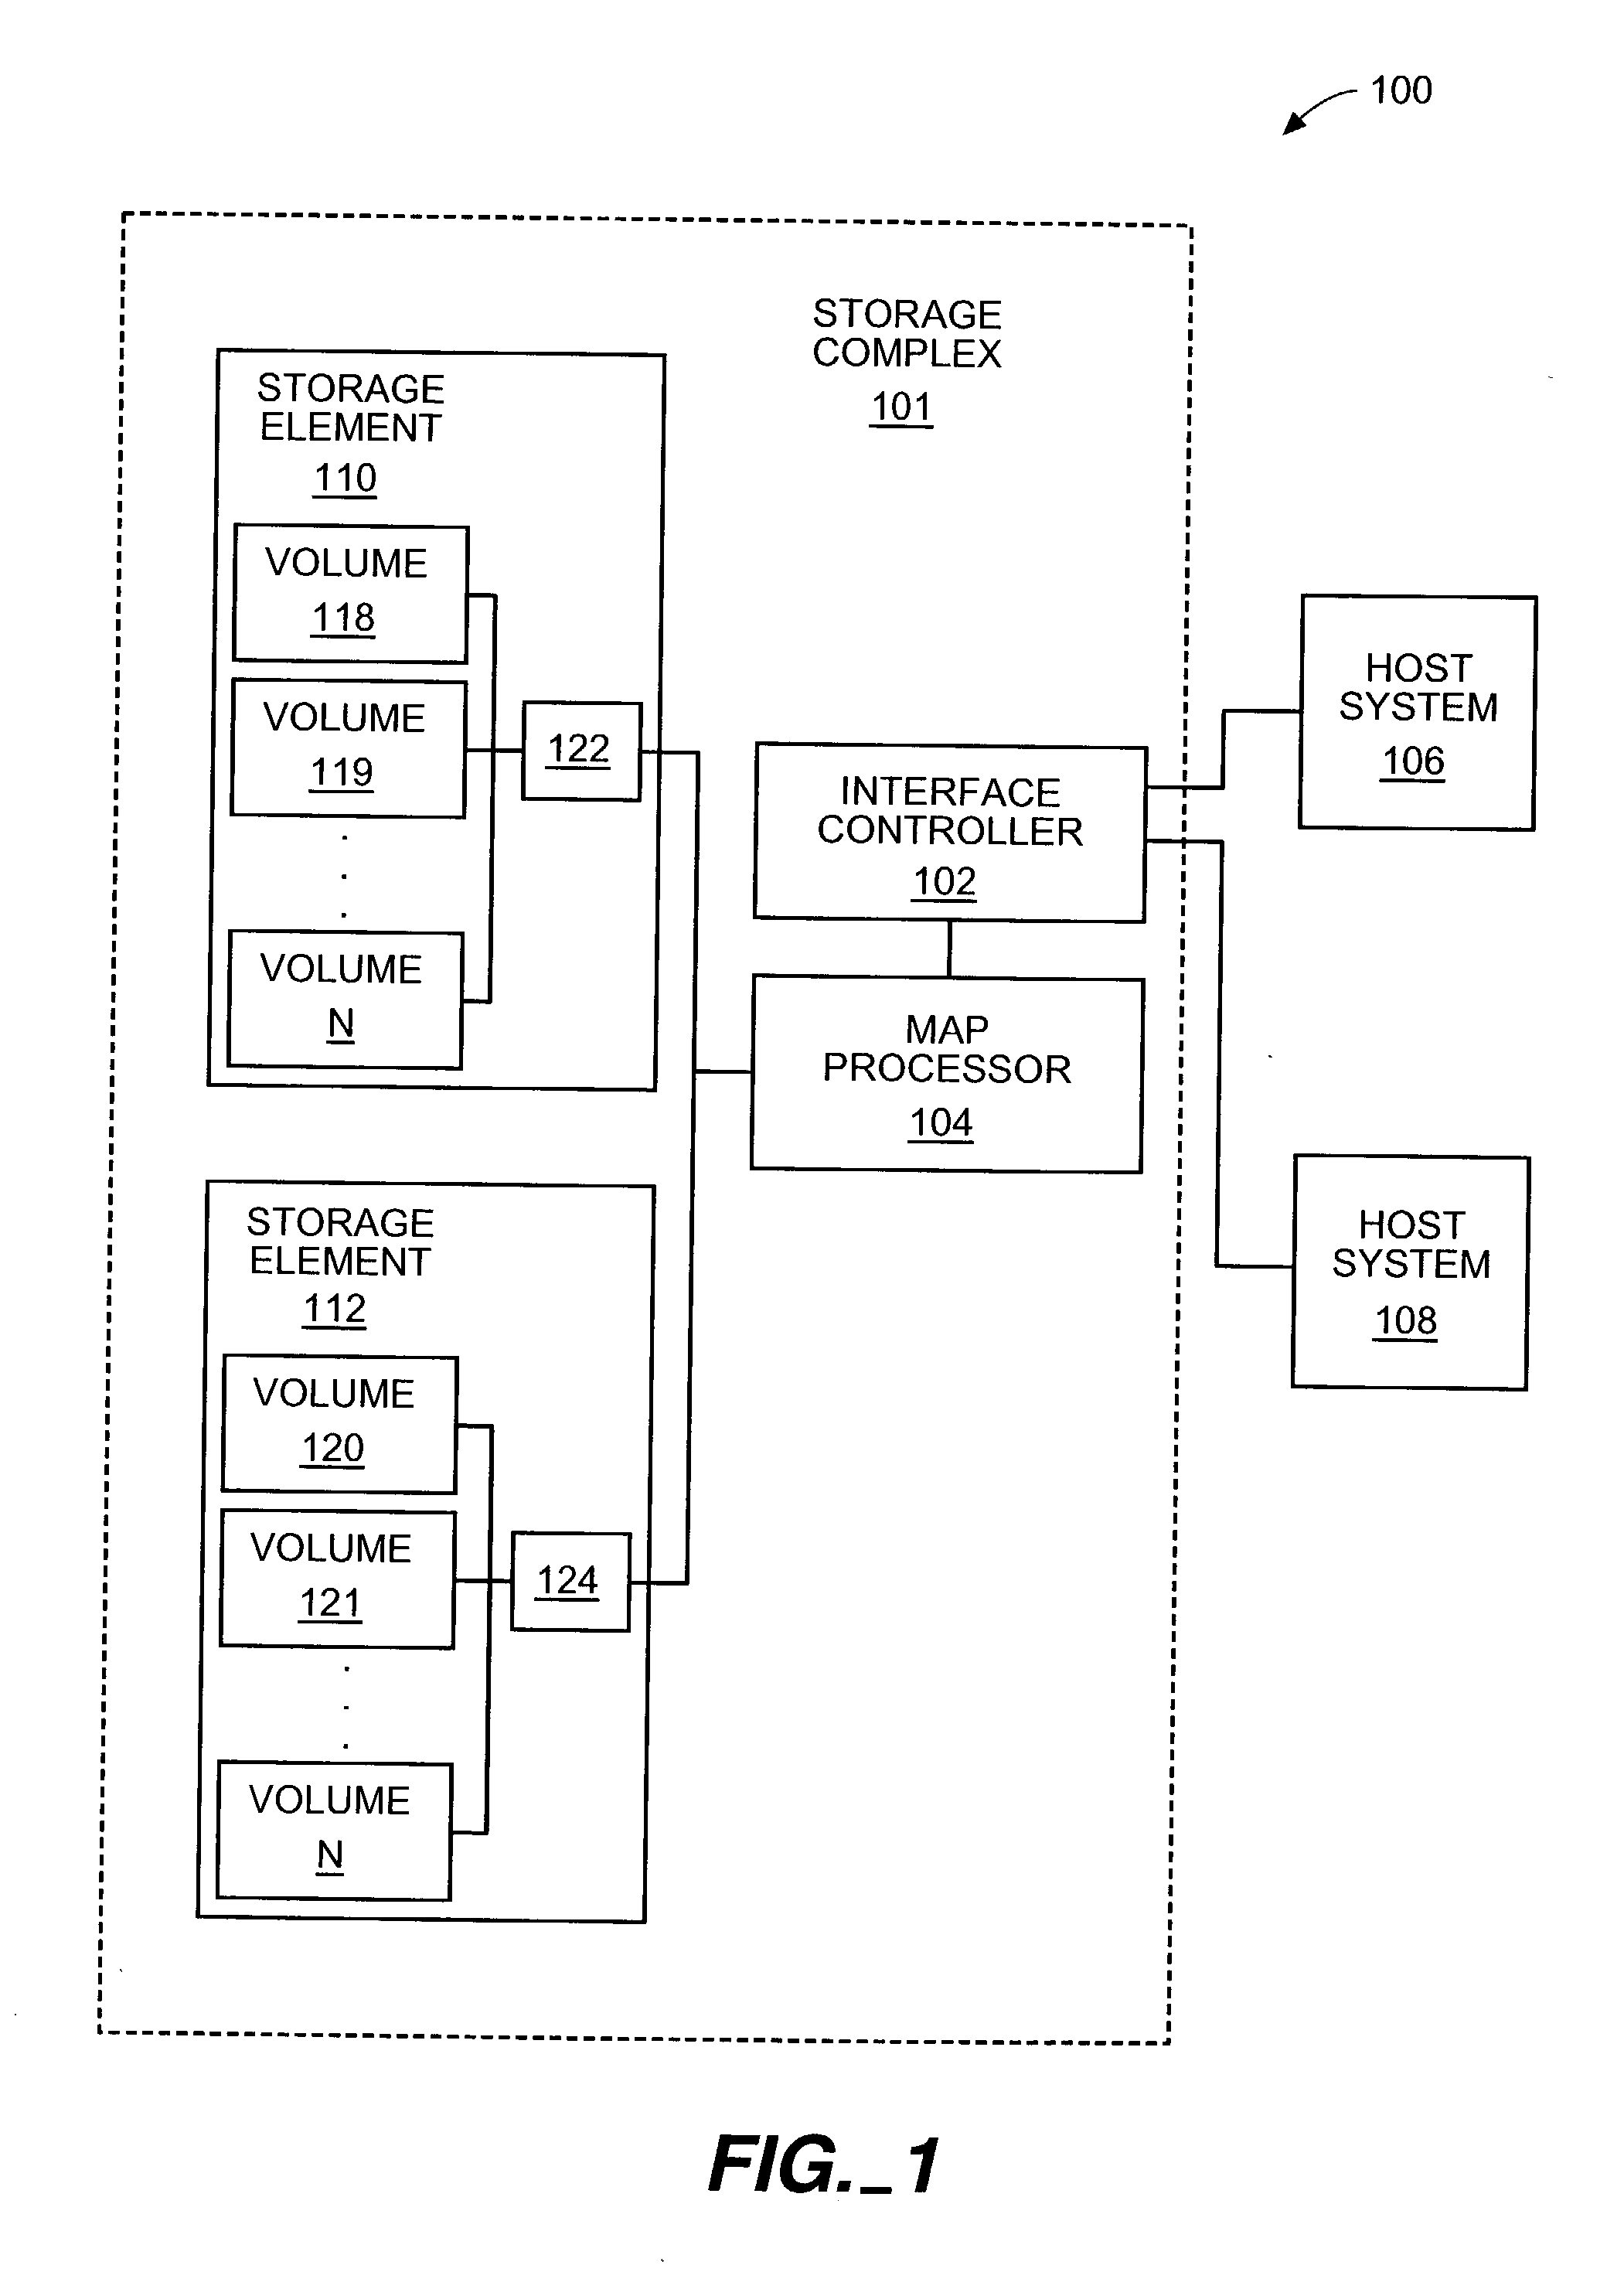 Method and apparatus for mapping storage partitions of storage elements to host systems